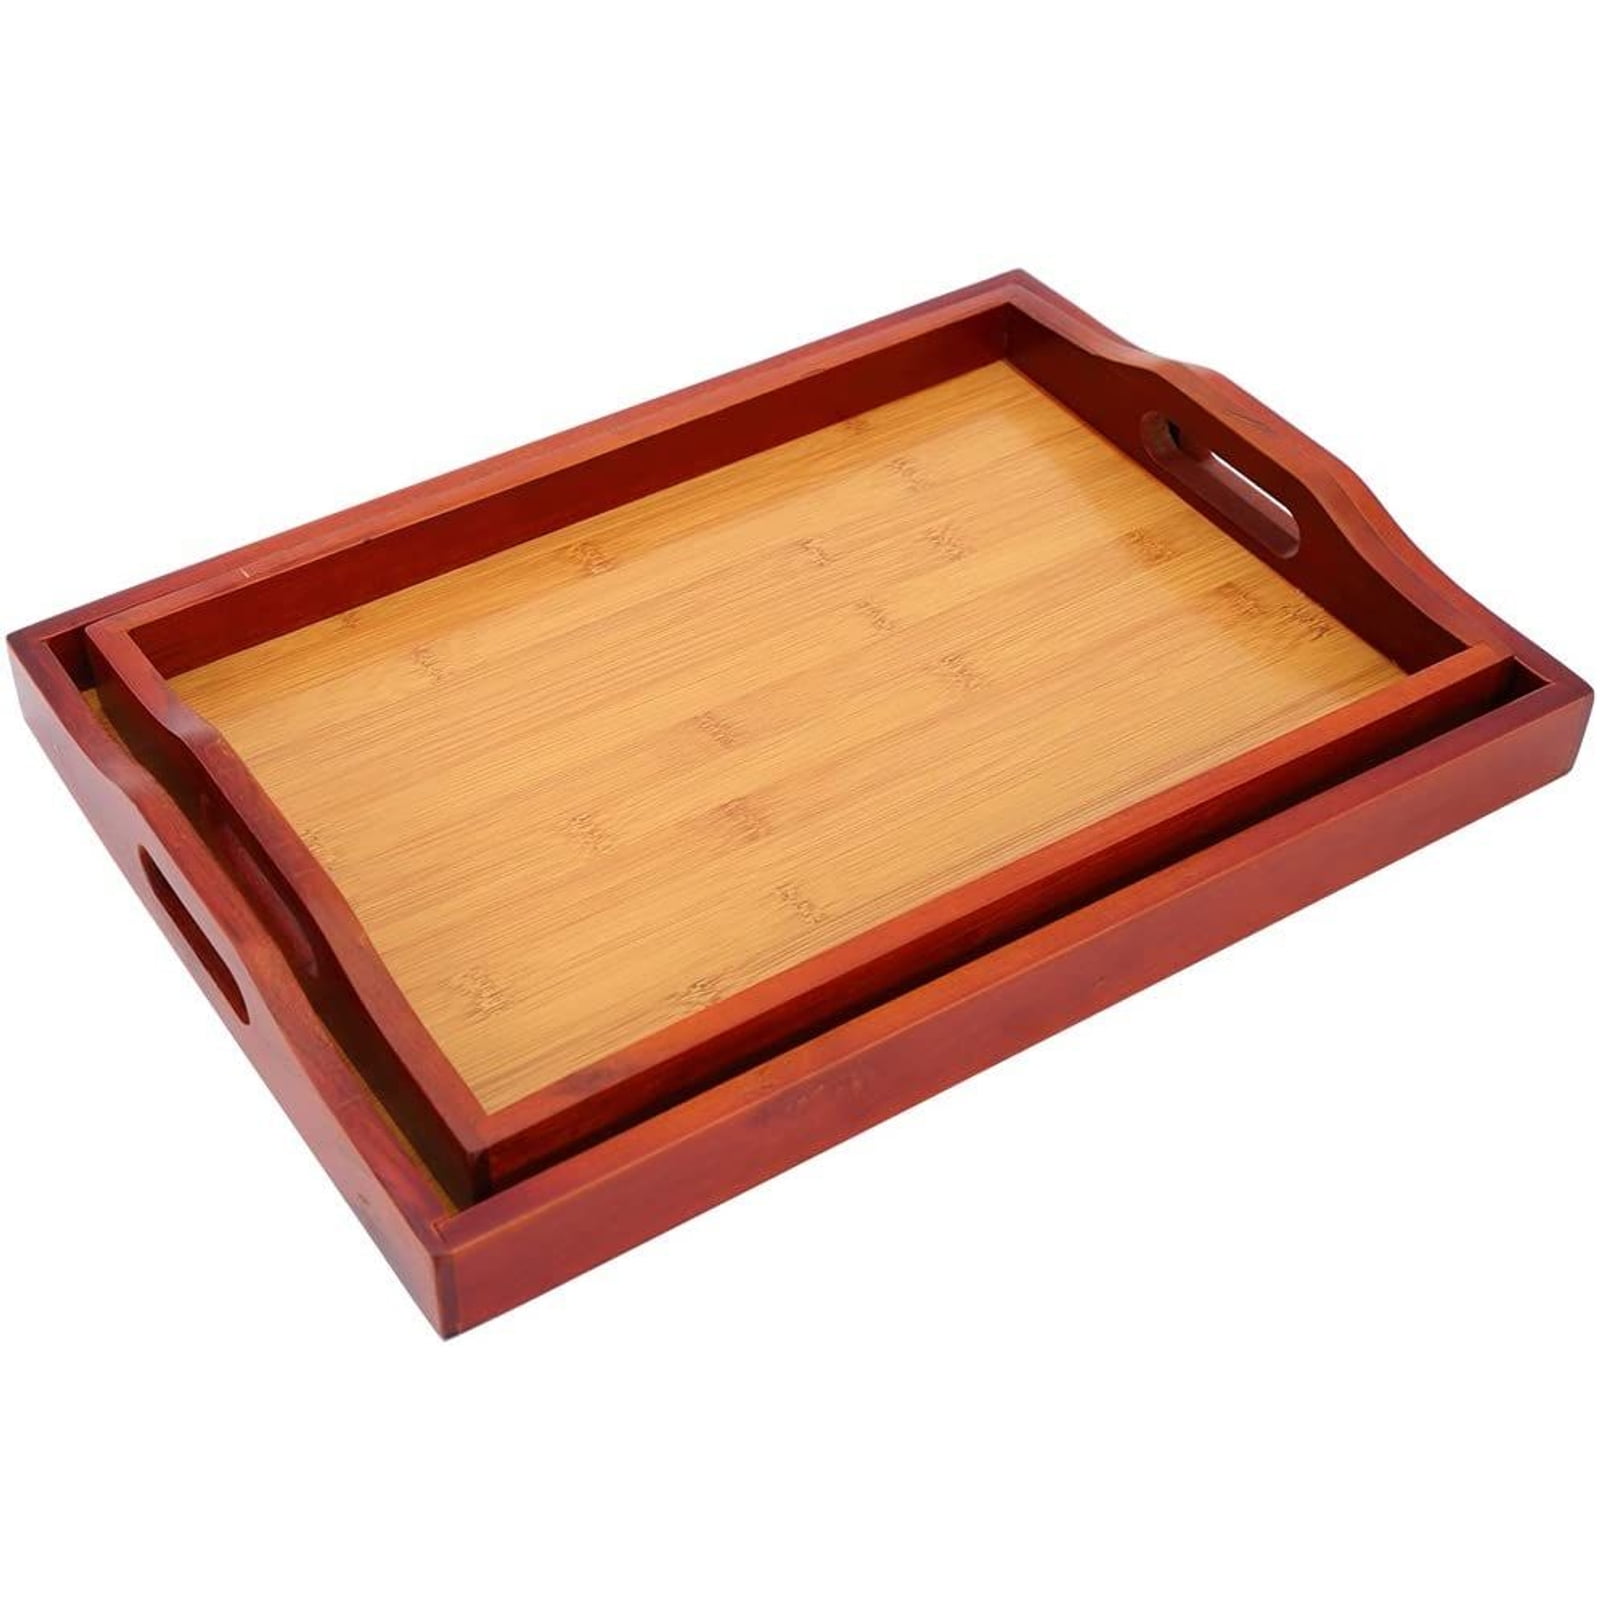 High Grade Wooden Serving Tray with Handles/Serving Tea Breakfast Wood Kitchen